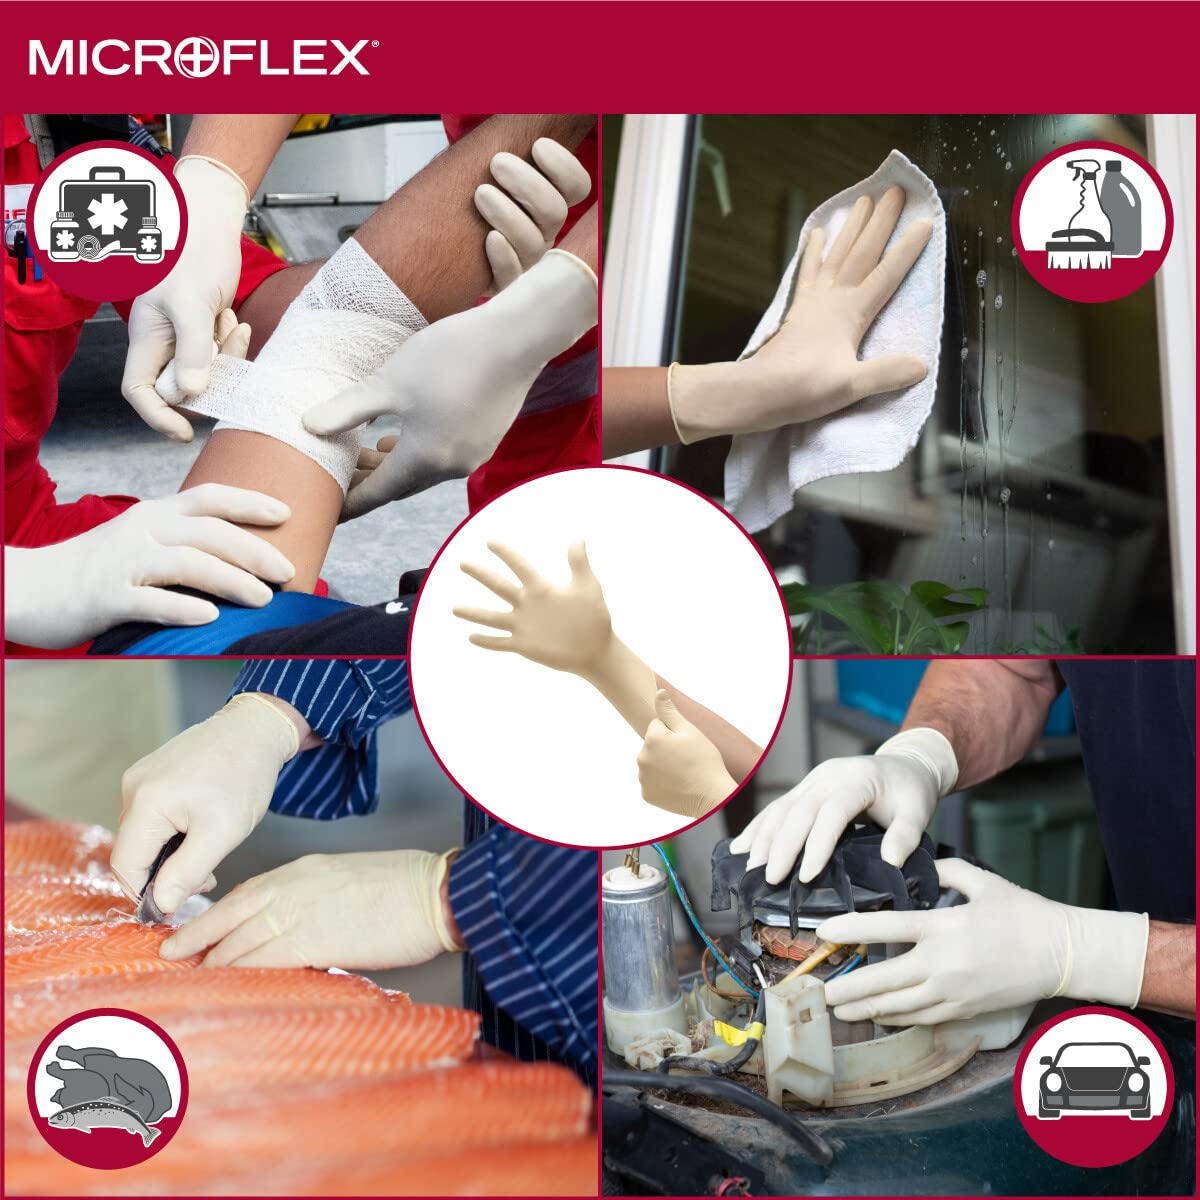 Microflex Diamond Grip MF-300 Disposable Latex Gloves for Automotive, Machinery Industries - Medium, Natural Clear (Box of 100)